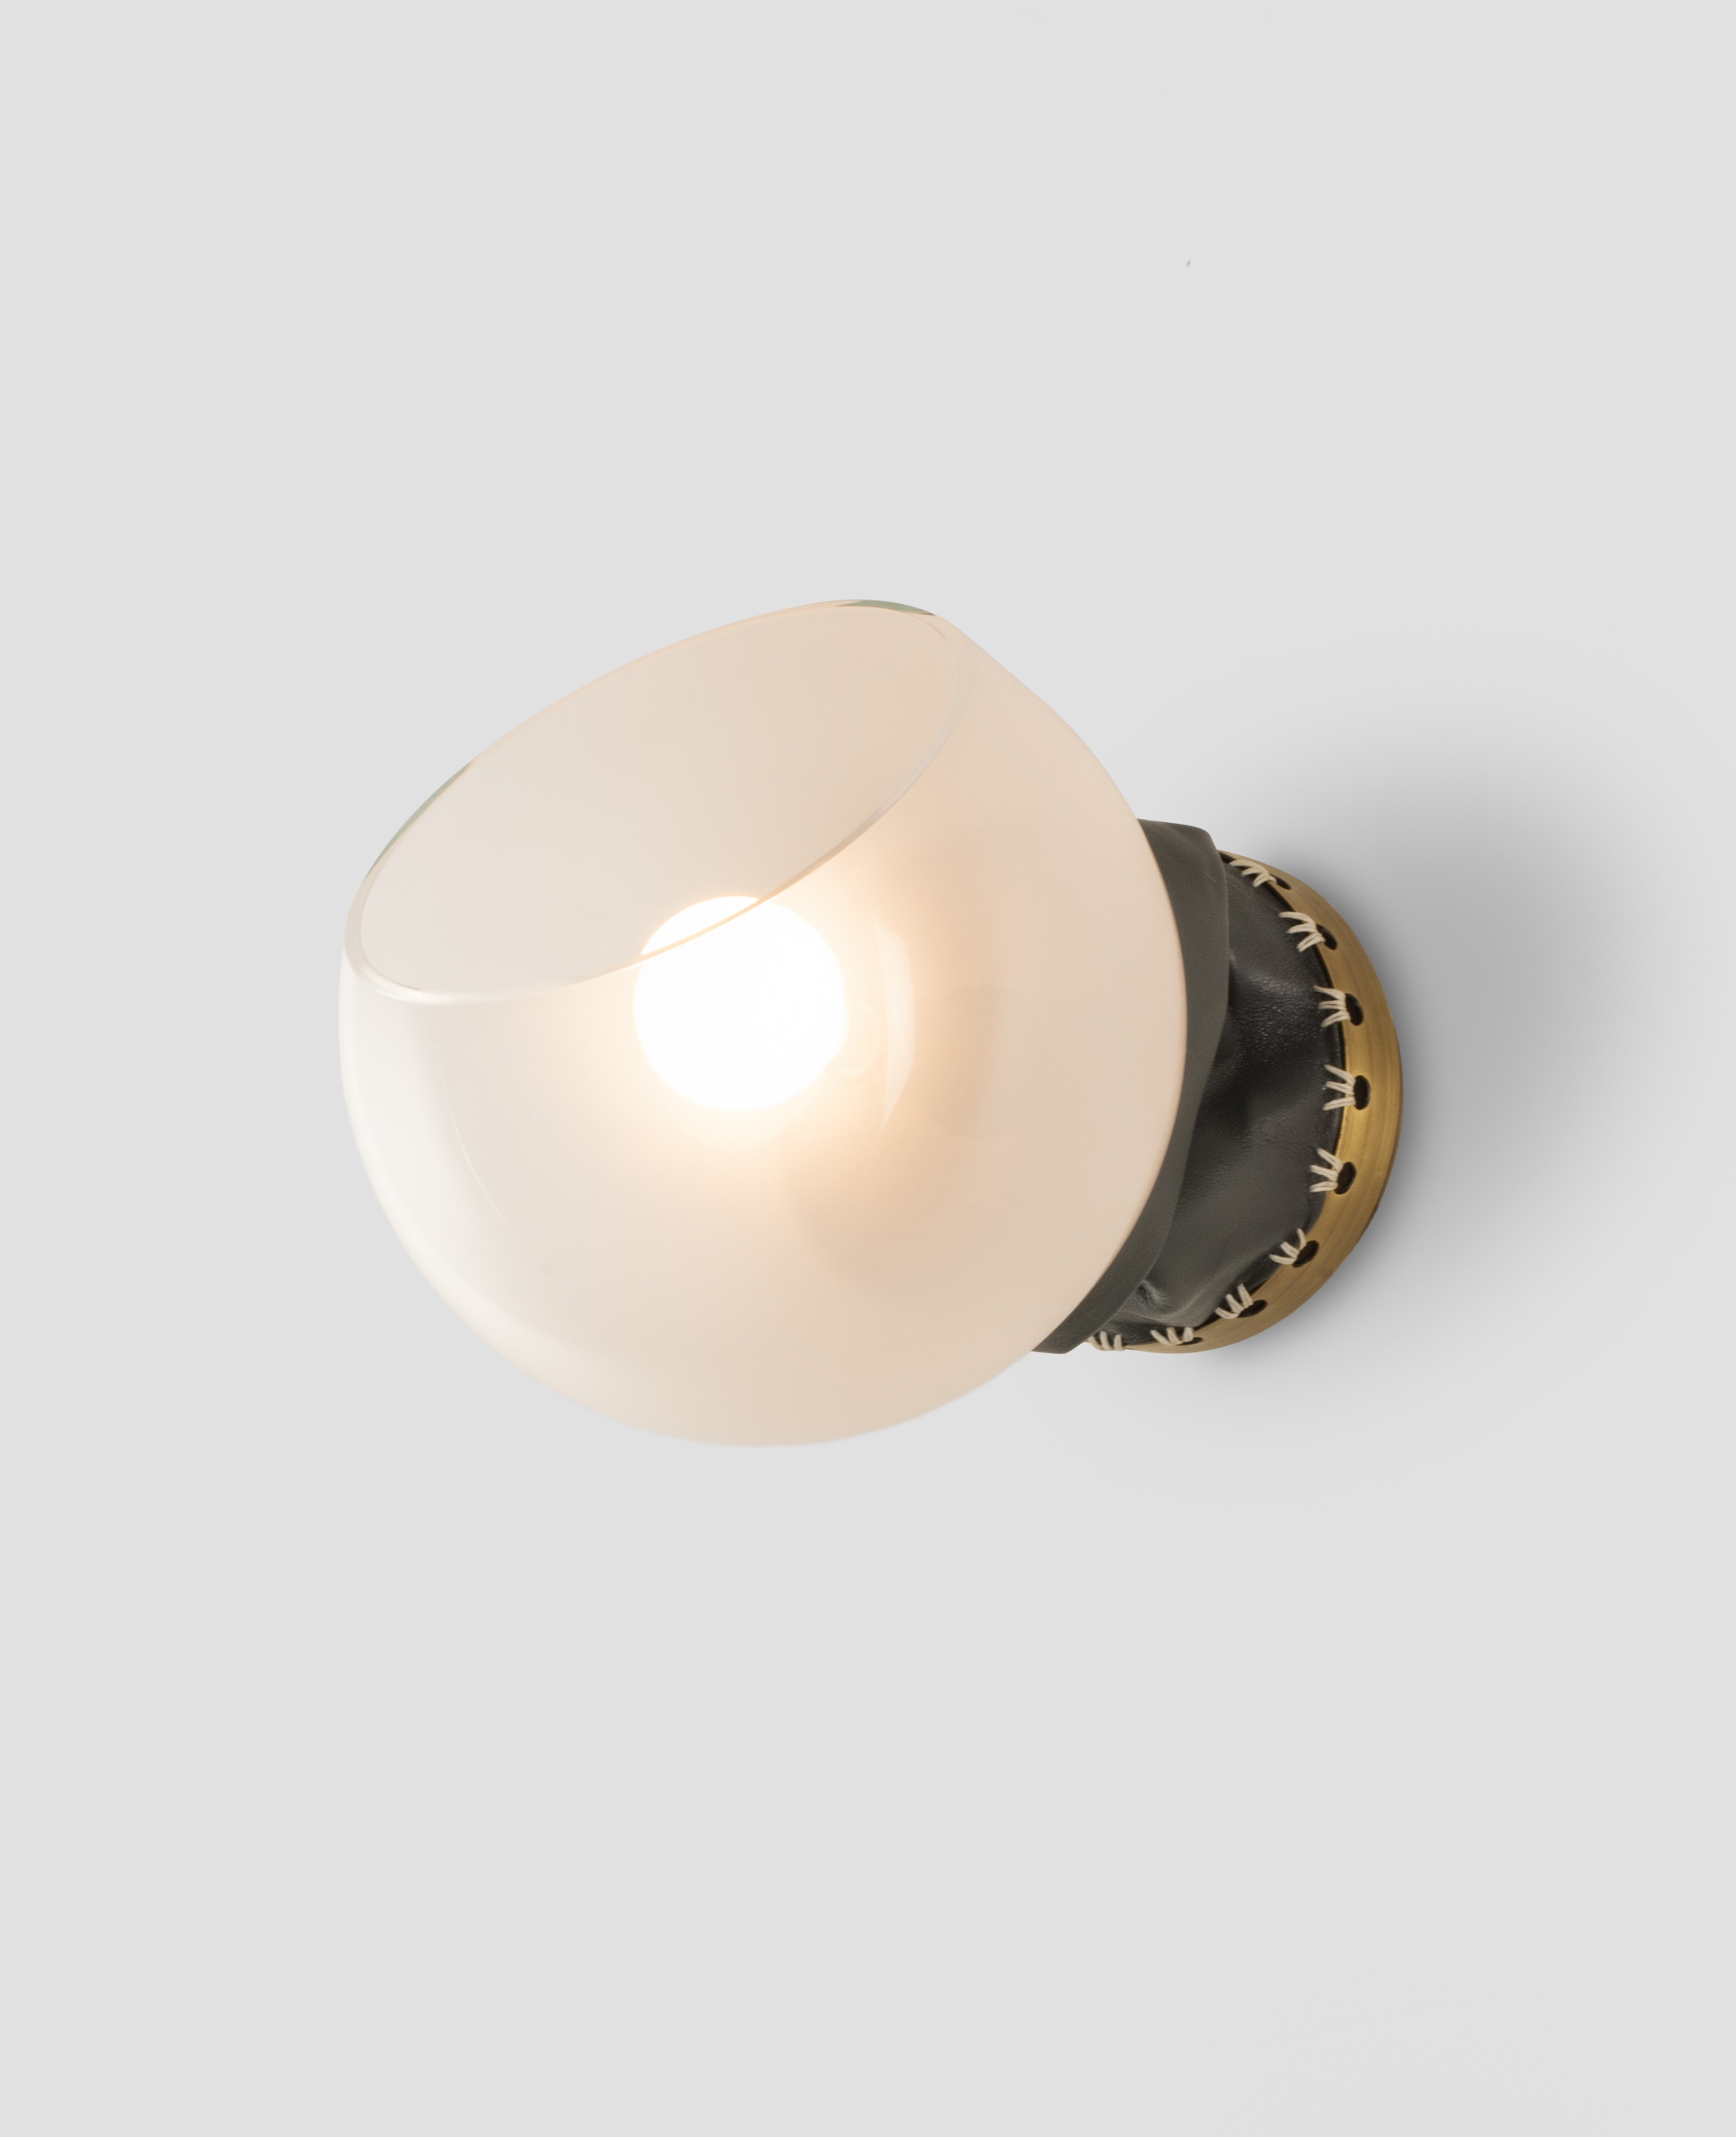 Light Antique Brass with Mink Leather and Clear Opal shade